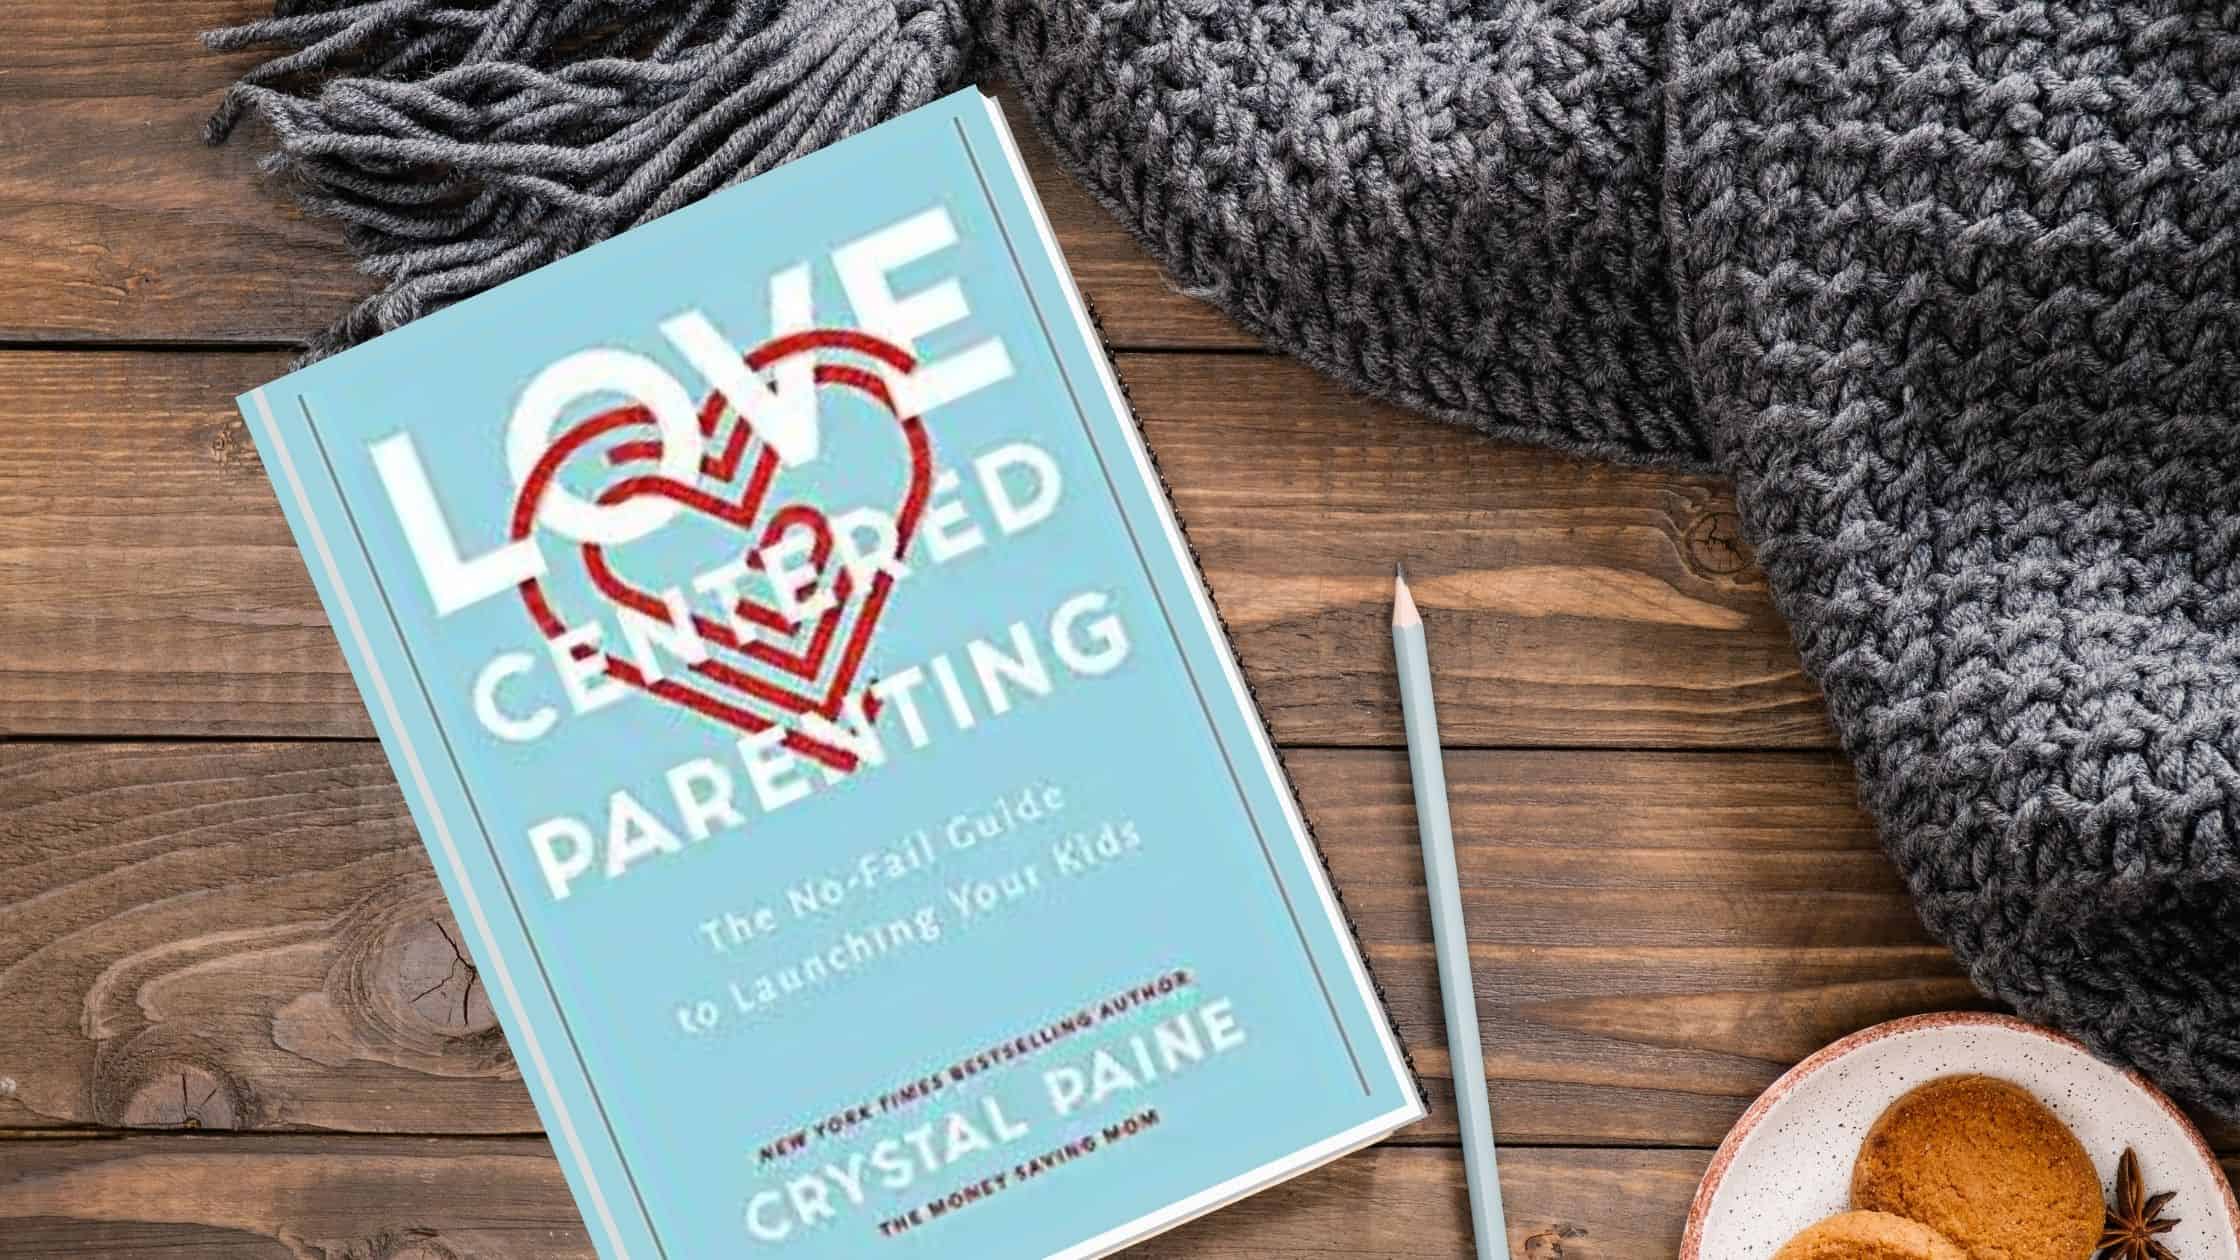 Book Review: Love-Centered Parenting by Crystal Paine